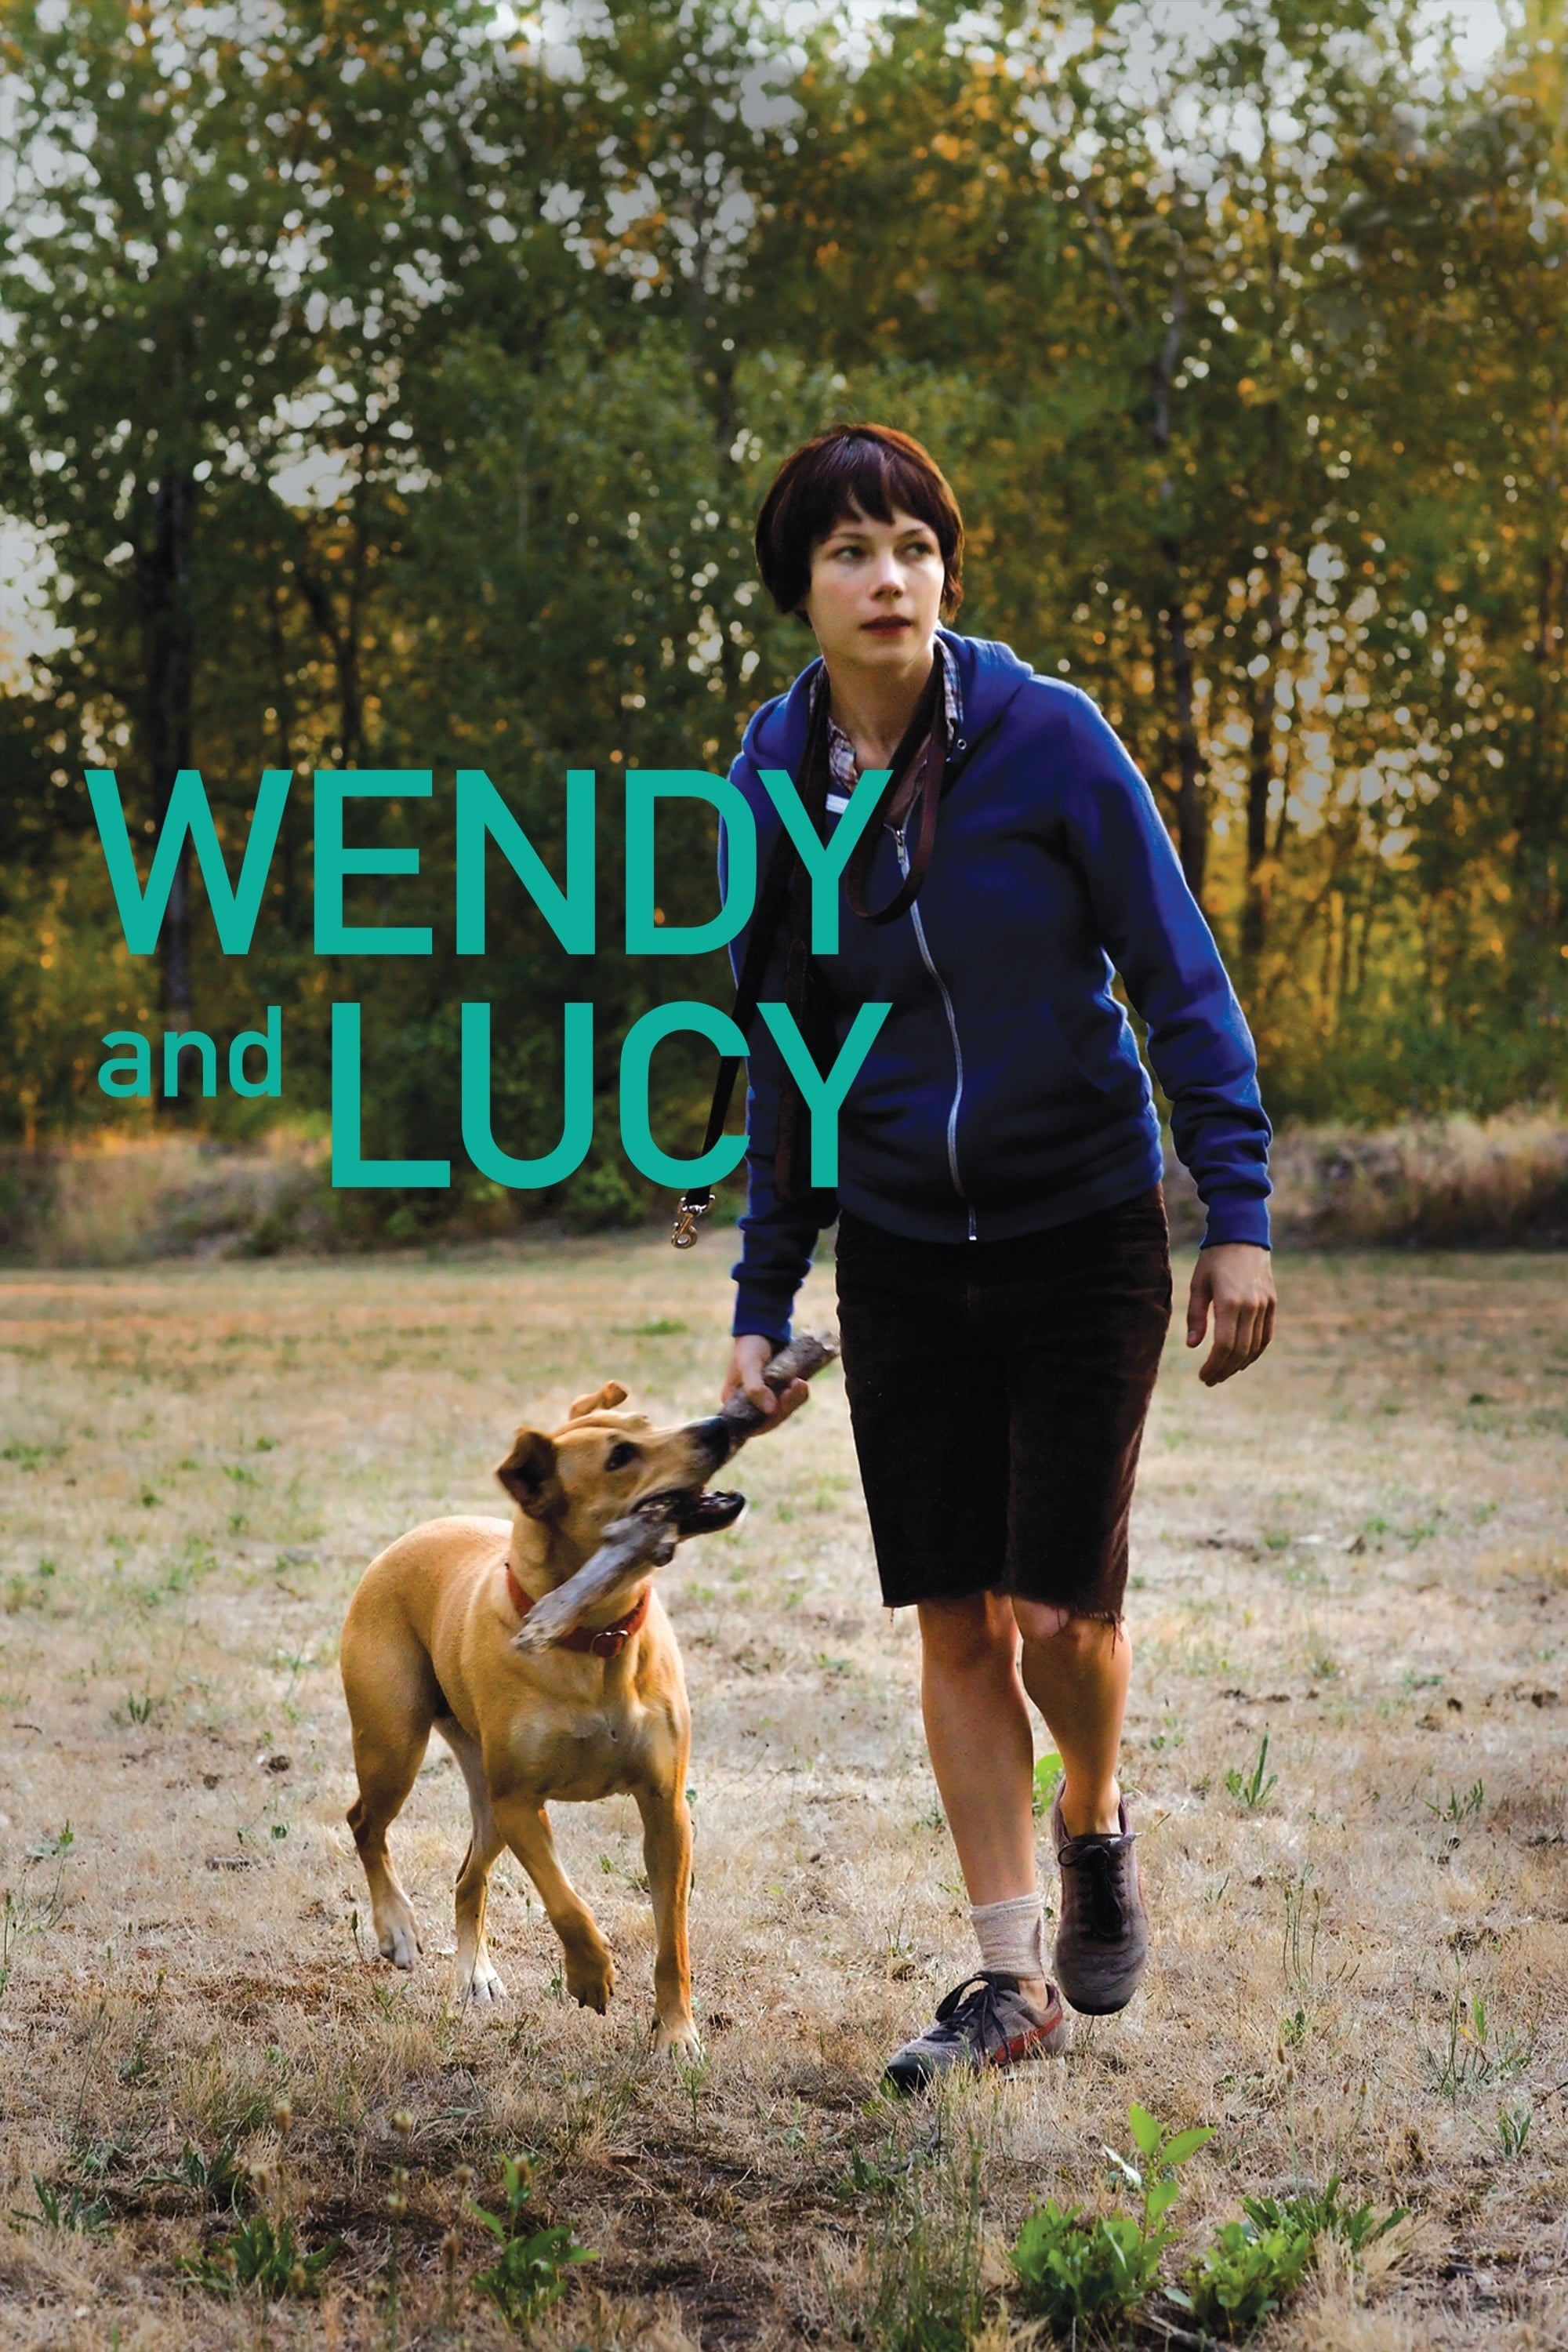 Wendy e Lucy (2008)